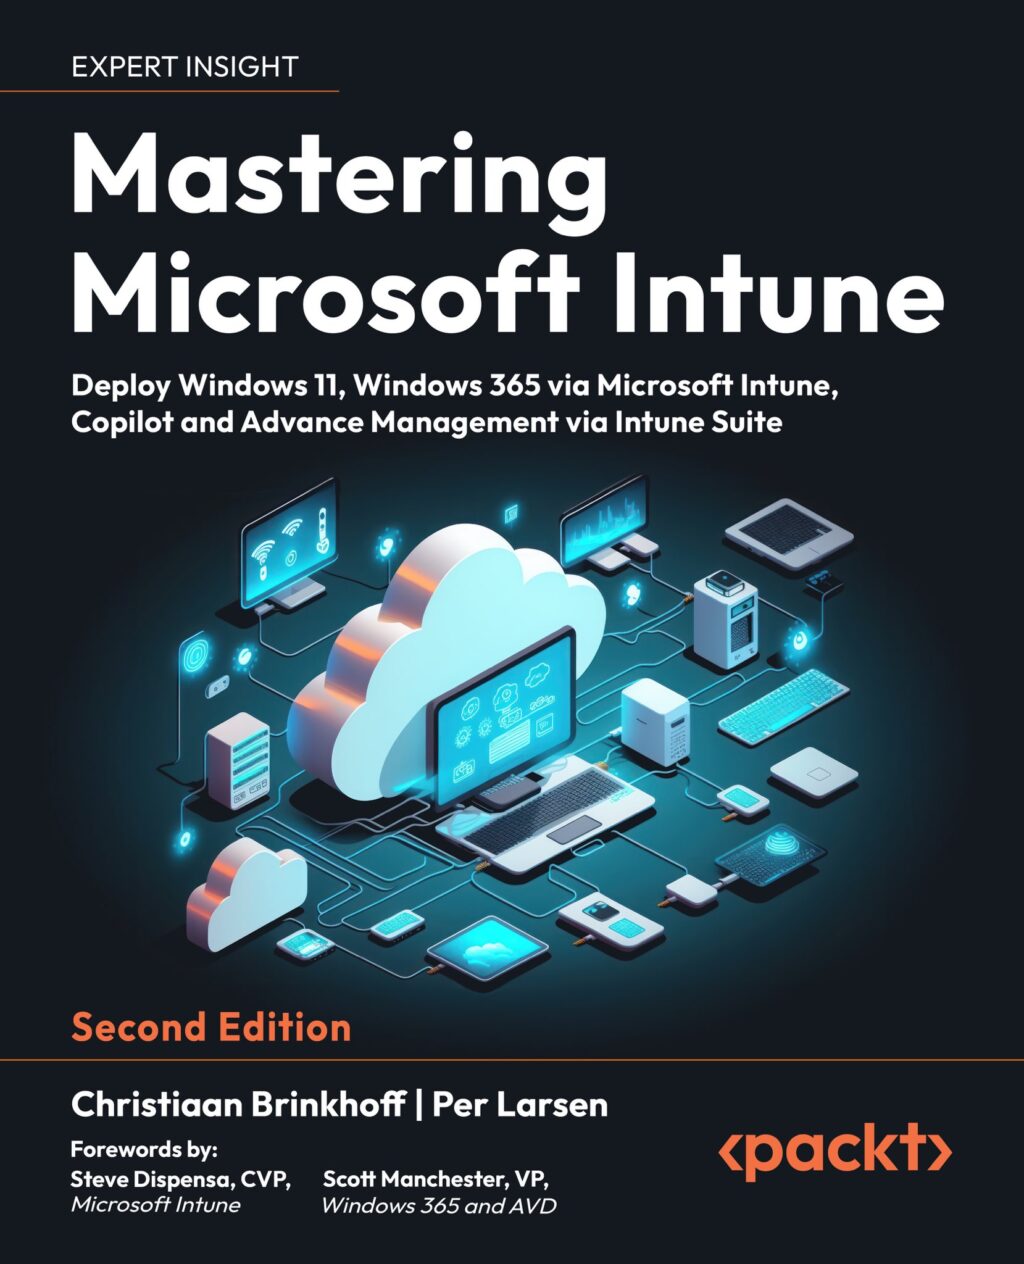 SOON AVAILABLE! Mastering Microsoft Intune: Deploy Windows 11, Windows 365 via Microsoft Intune, Copilot and Advance Management via Intune Suite 2nd Edition